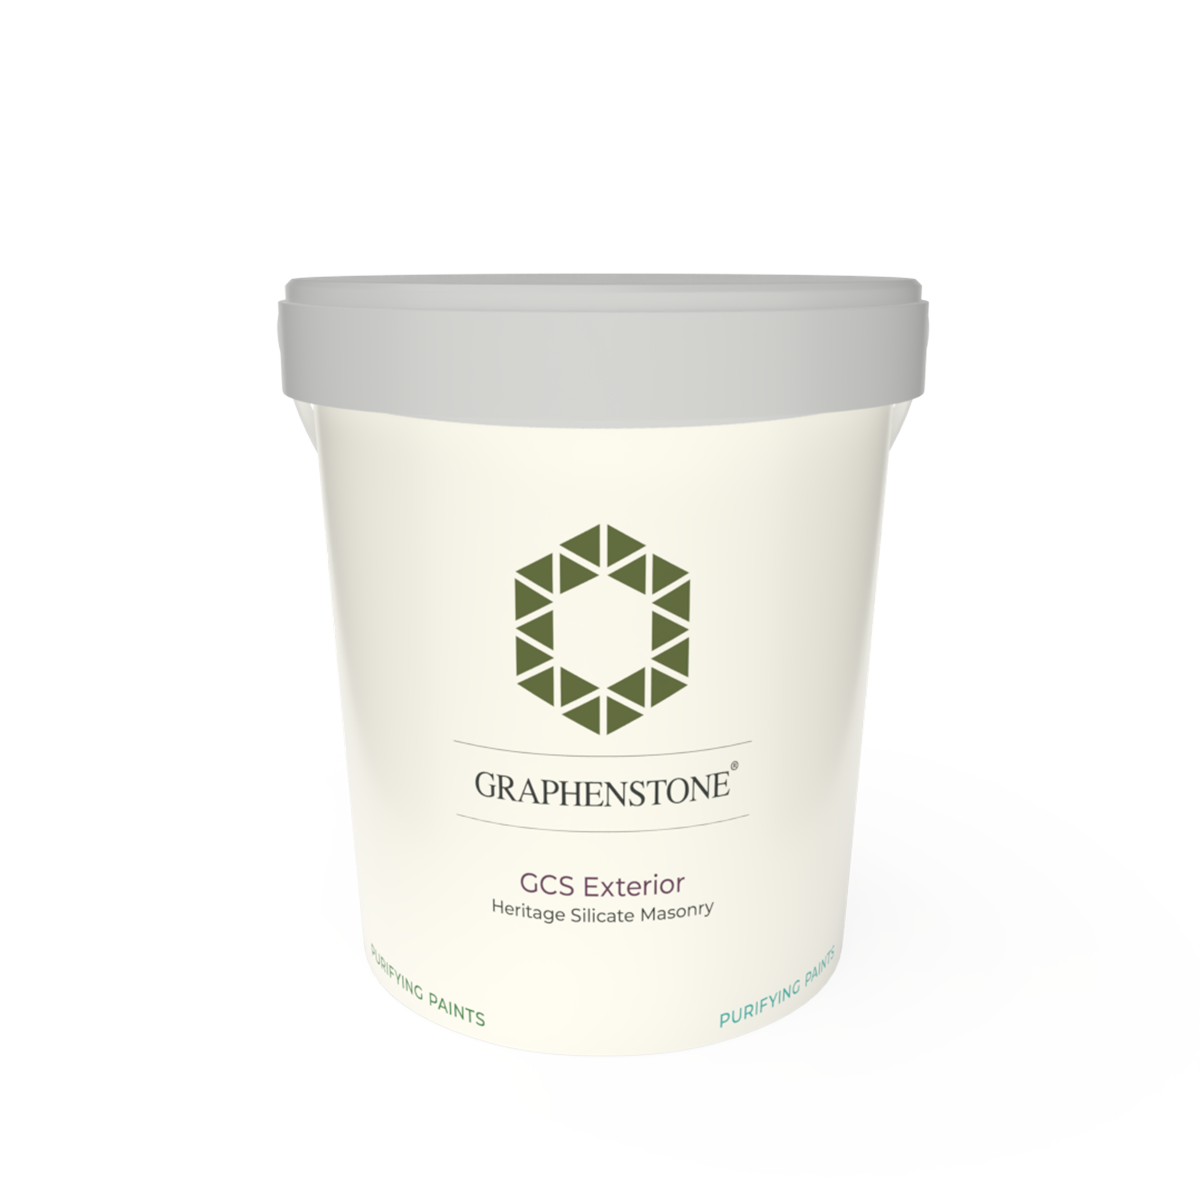 GCS Exterior Colour – Our classic, breathable matt masonry paint for heritage / listed properties, Ultra Matt finish for Lime renders and exterior masonry